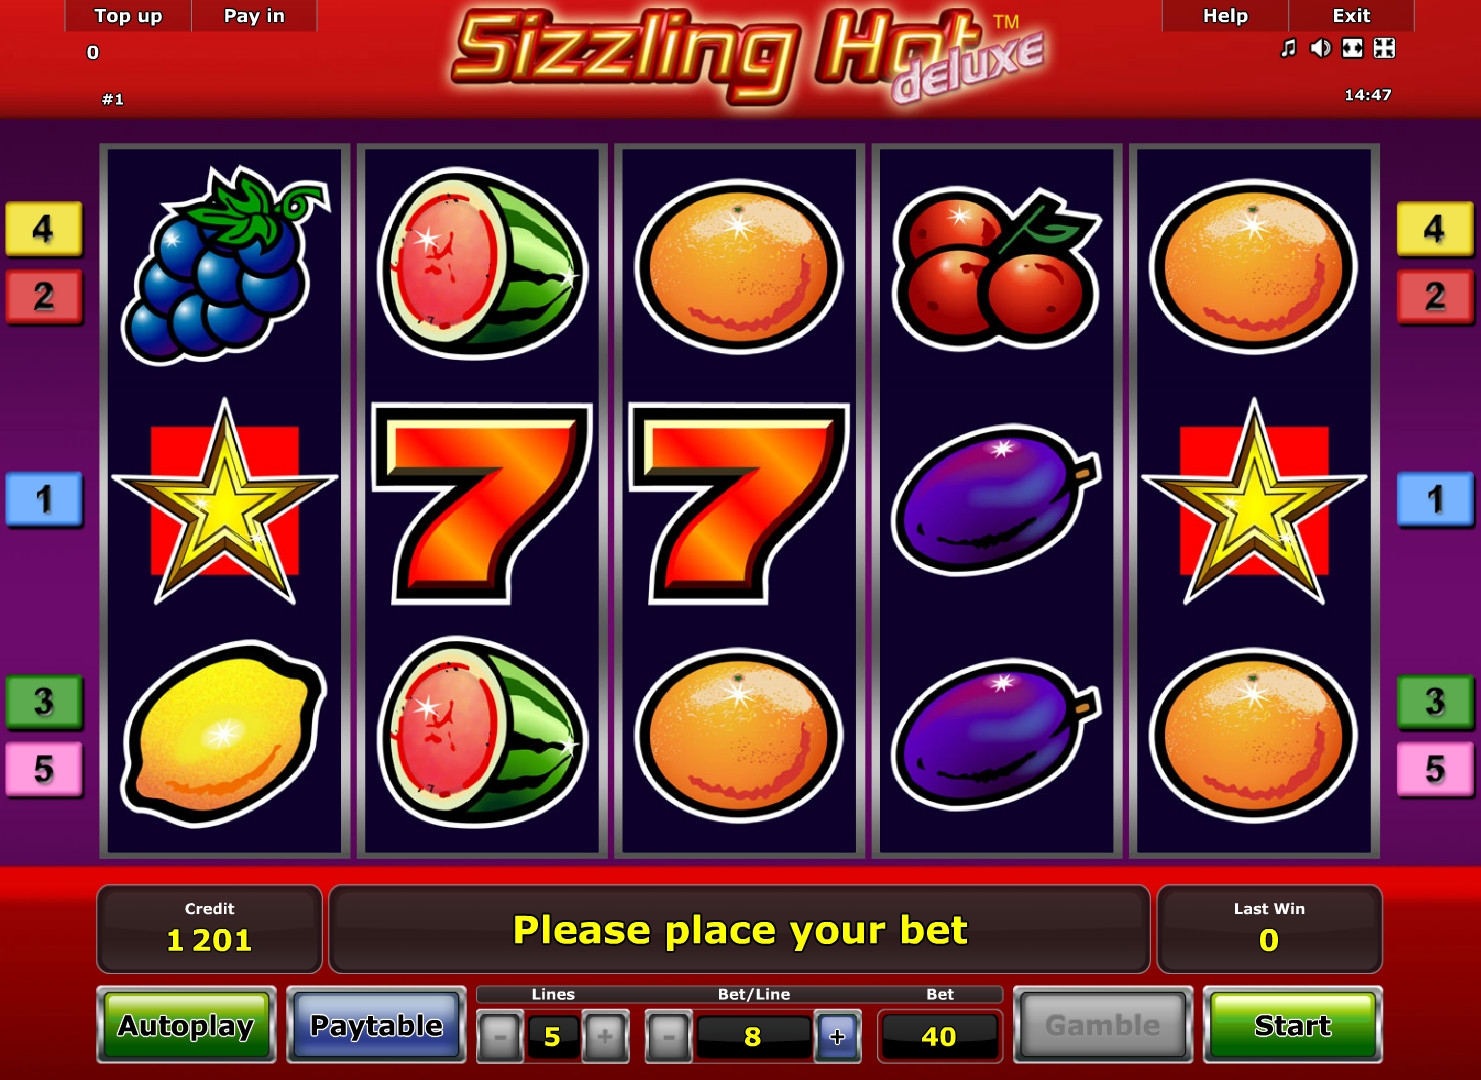 Sizzling Hot Deluxe (Sizzling Hot Deluxe) from category Slots